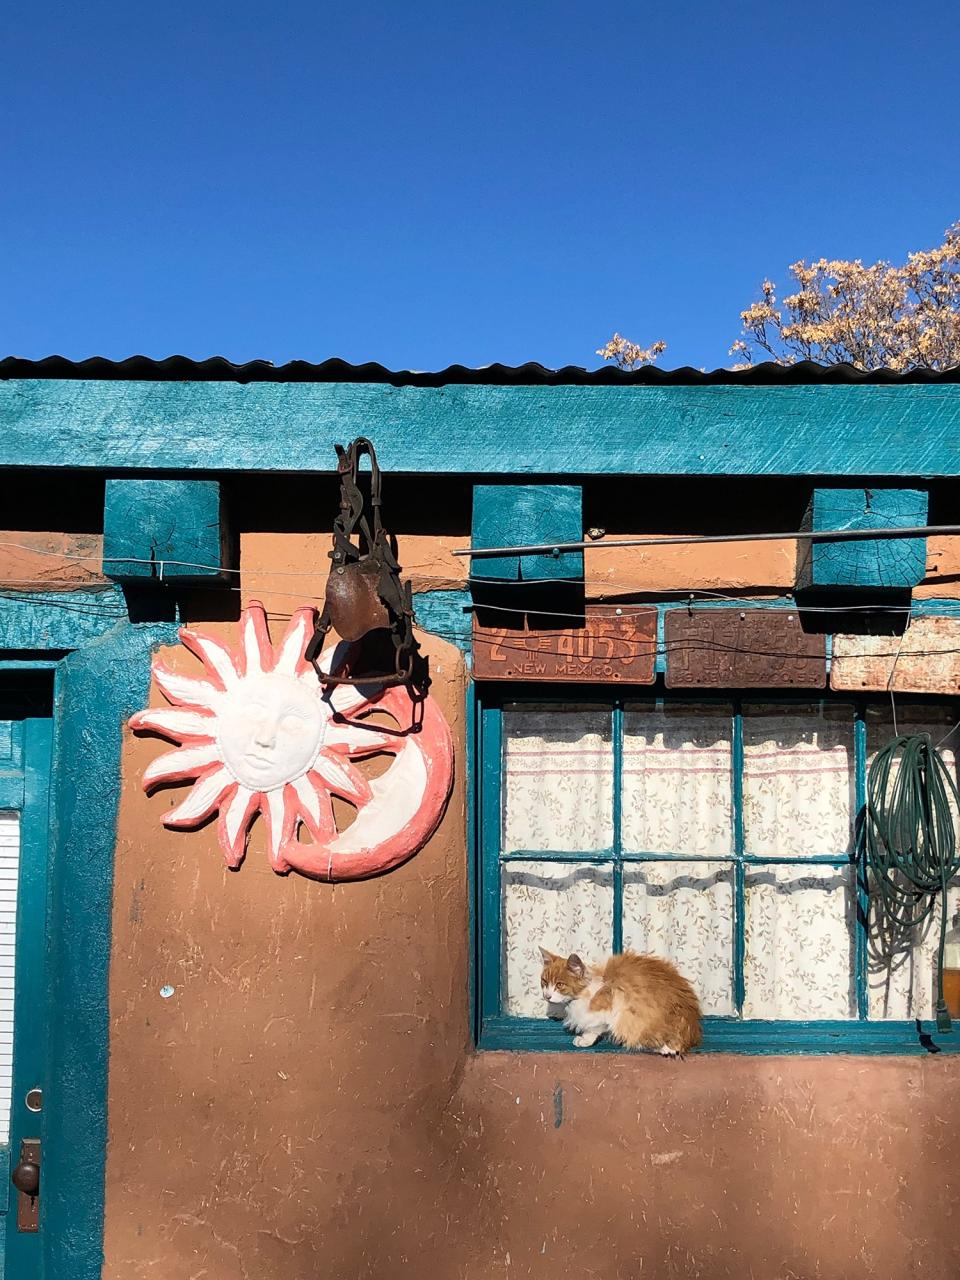 I am a cat lady. No cat can resist me. Ask my friend Jeanne Damas: her cat is so wild and I tamed her. Look at this perfect blue sky in Chimayo, New Mexico.